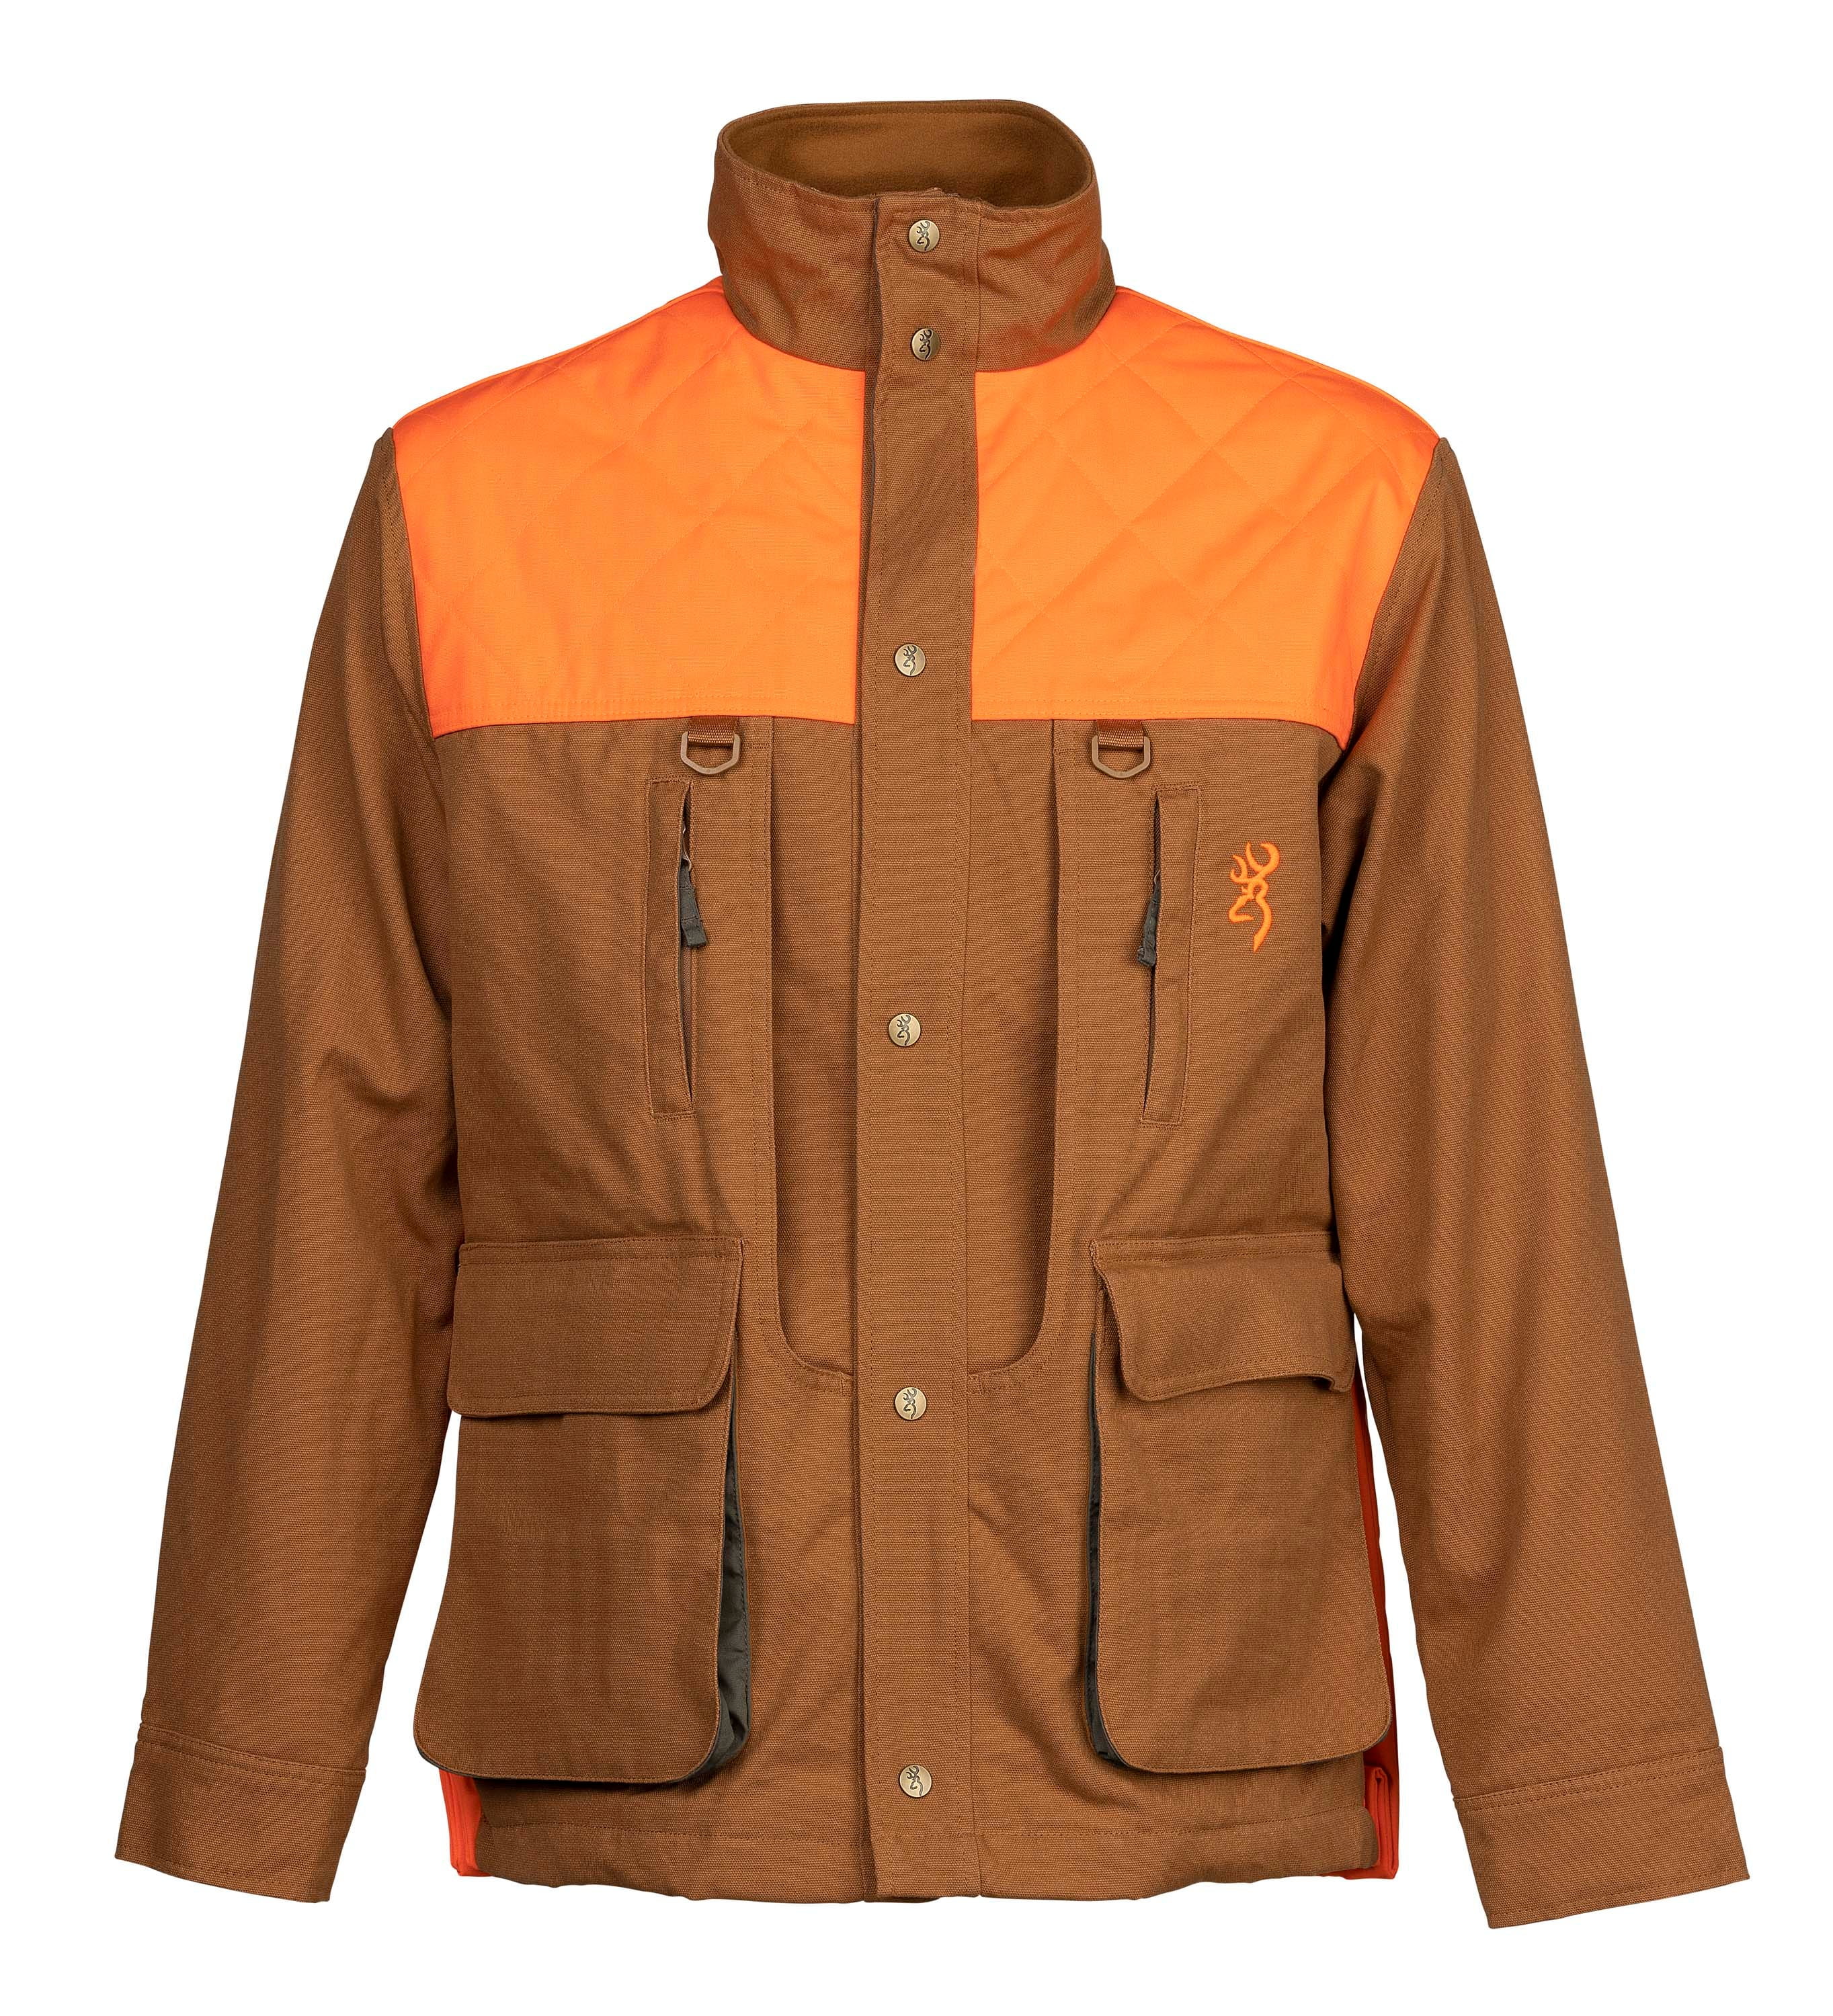 Drake Reflex™ 3-in-1 Plus 2 Systems Jacket - Simmons Sporting Goods